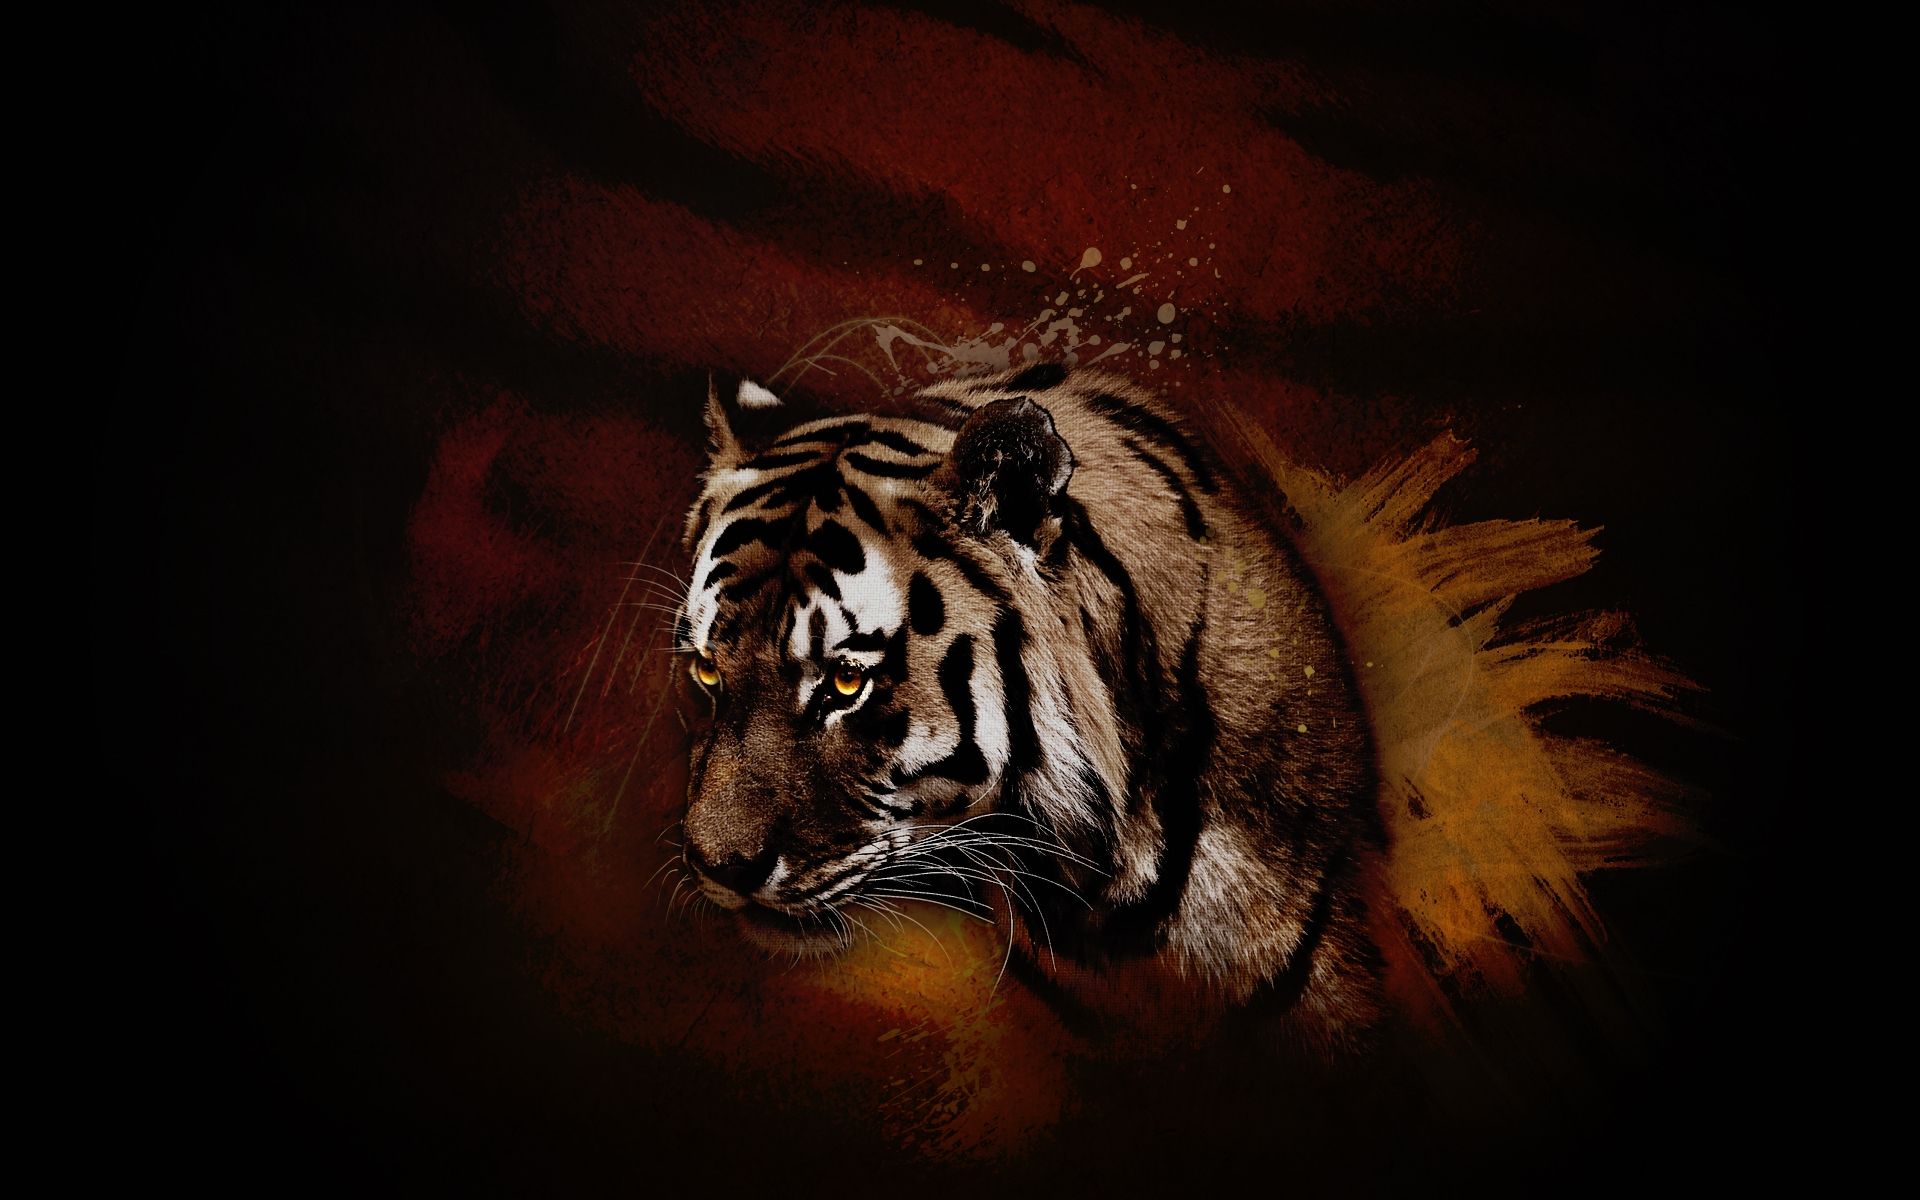 Tiger Art, Picture